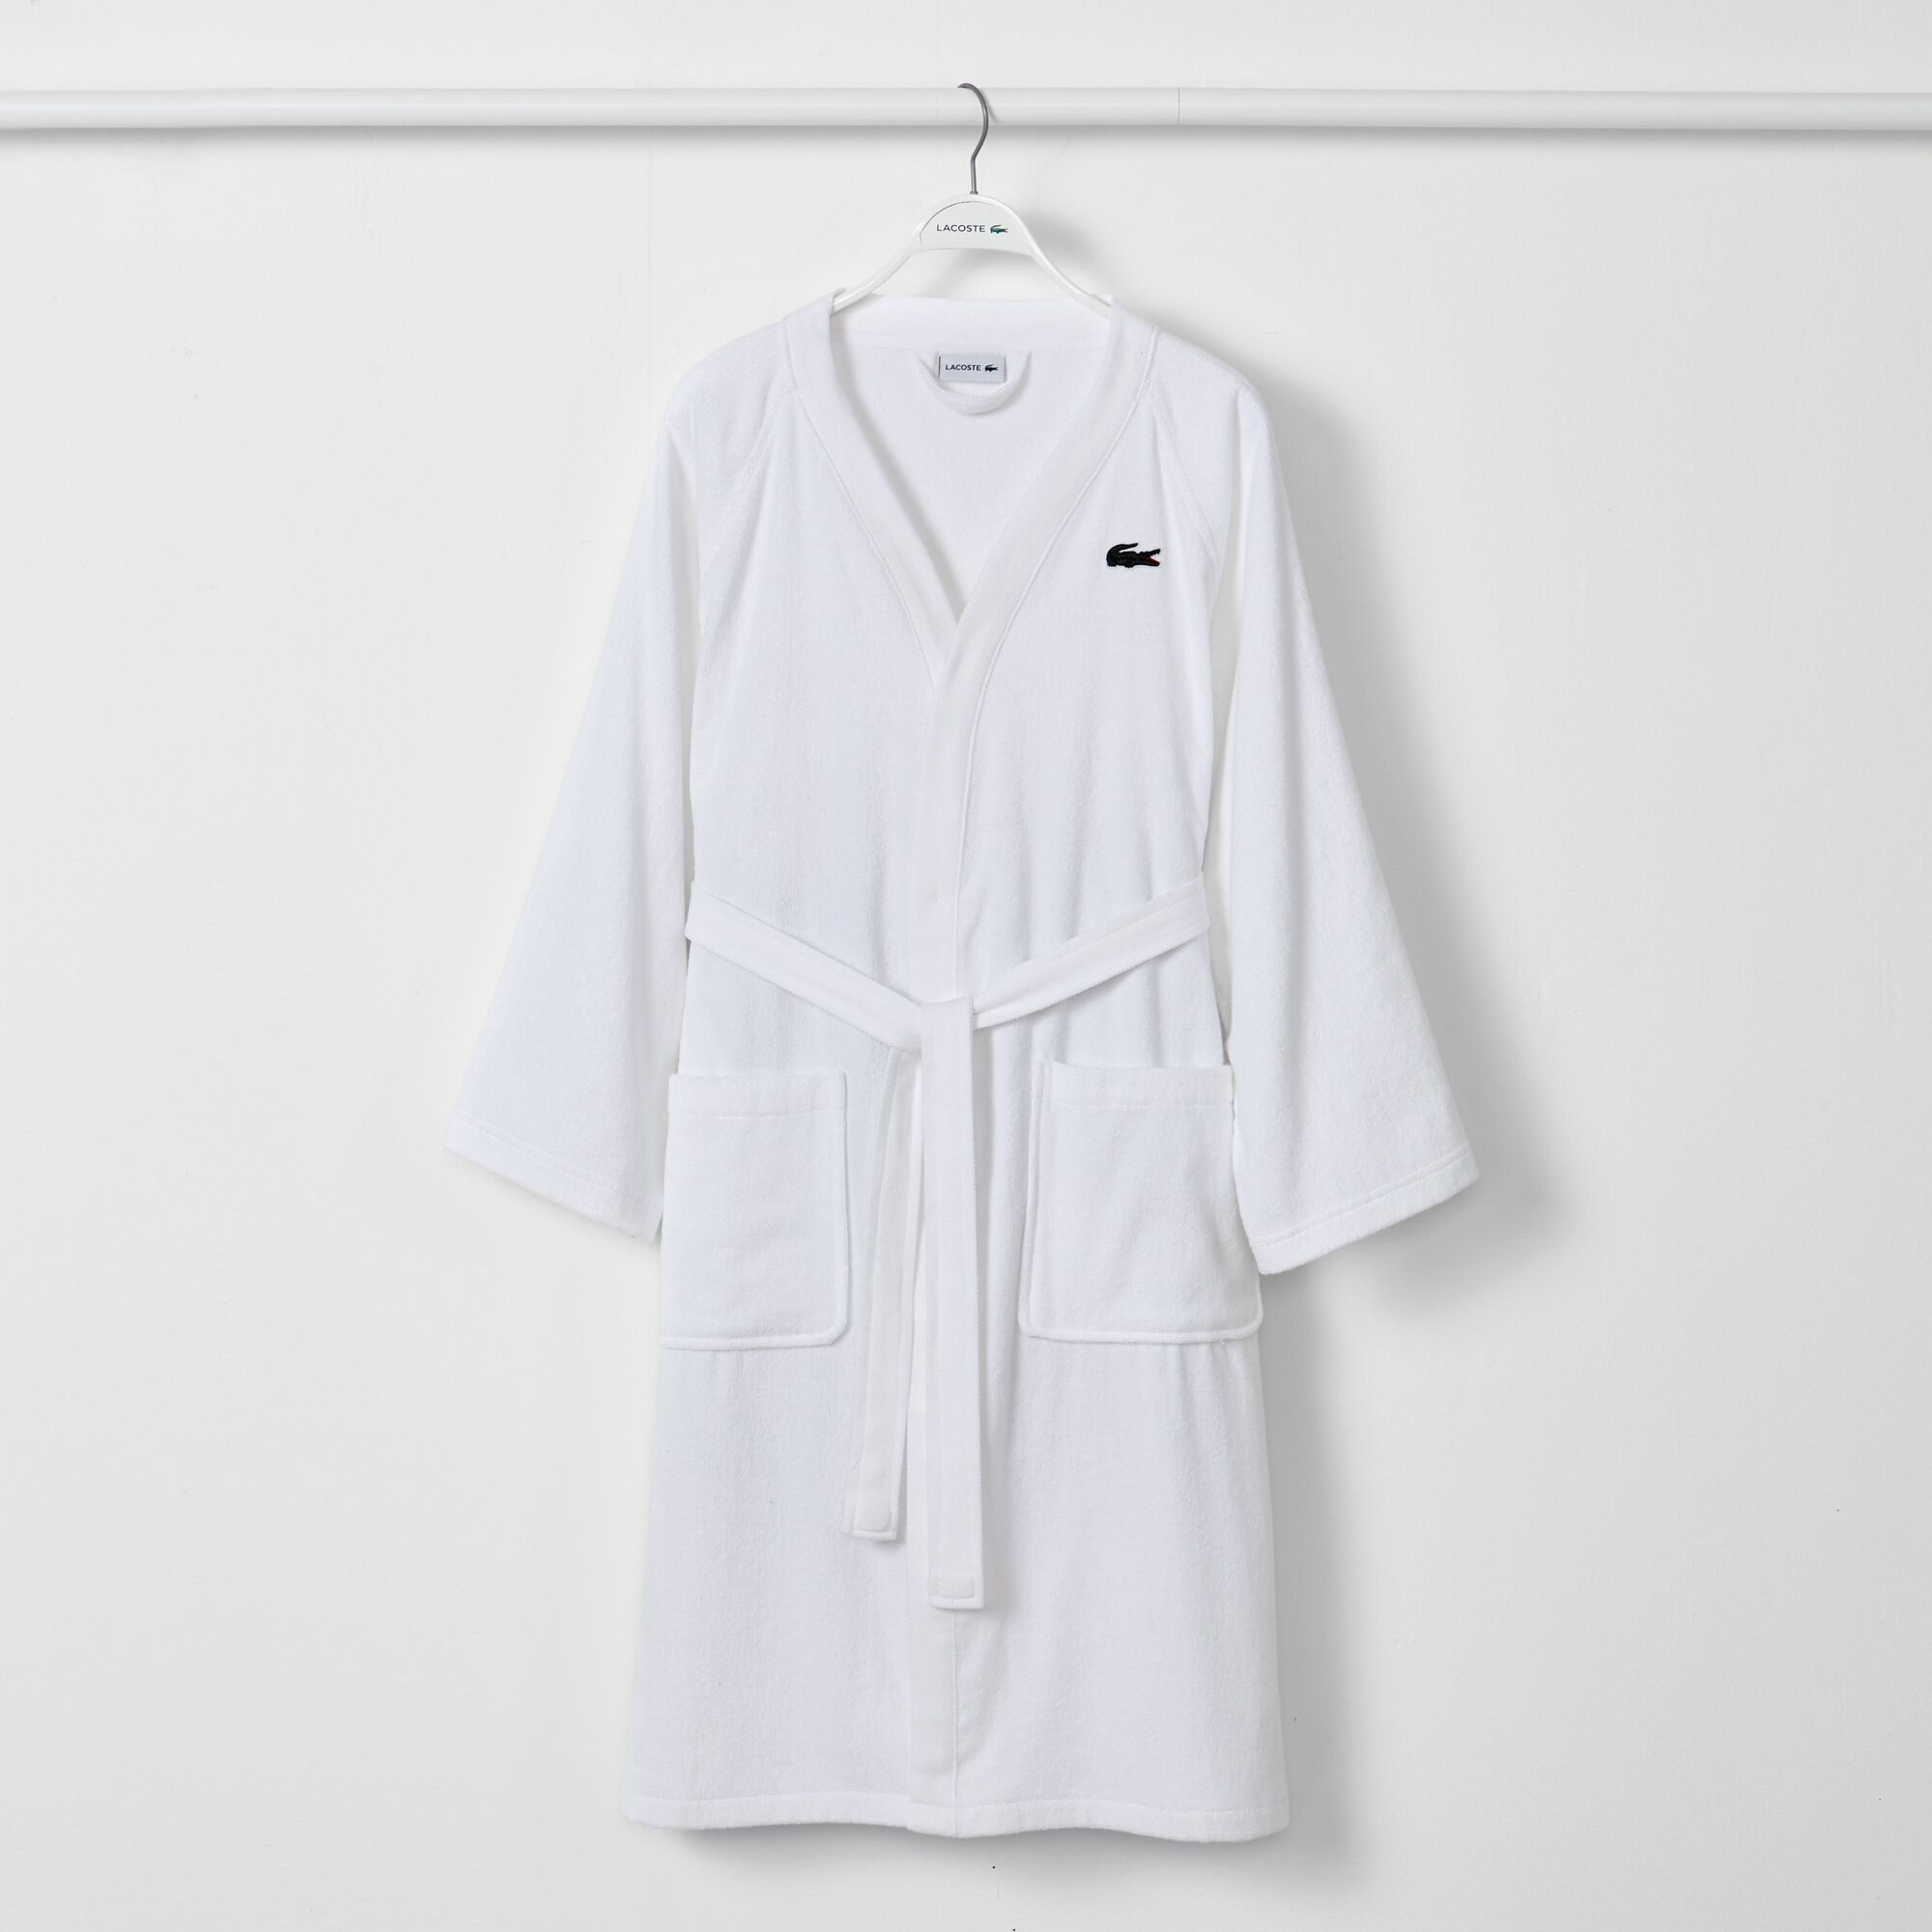 Lacoste Cotton Percale 100% Cotton Terry Cloth Knee with Pockets & Reviews | Wayfair